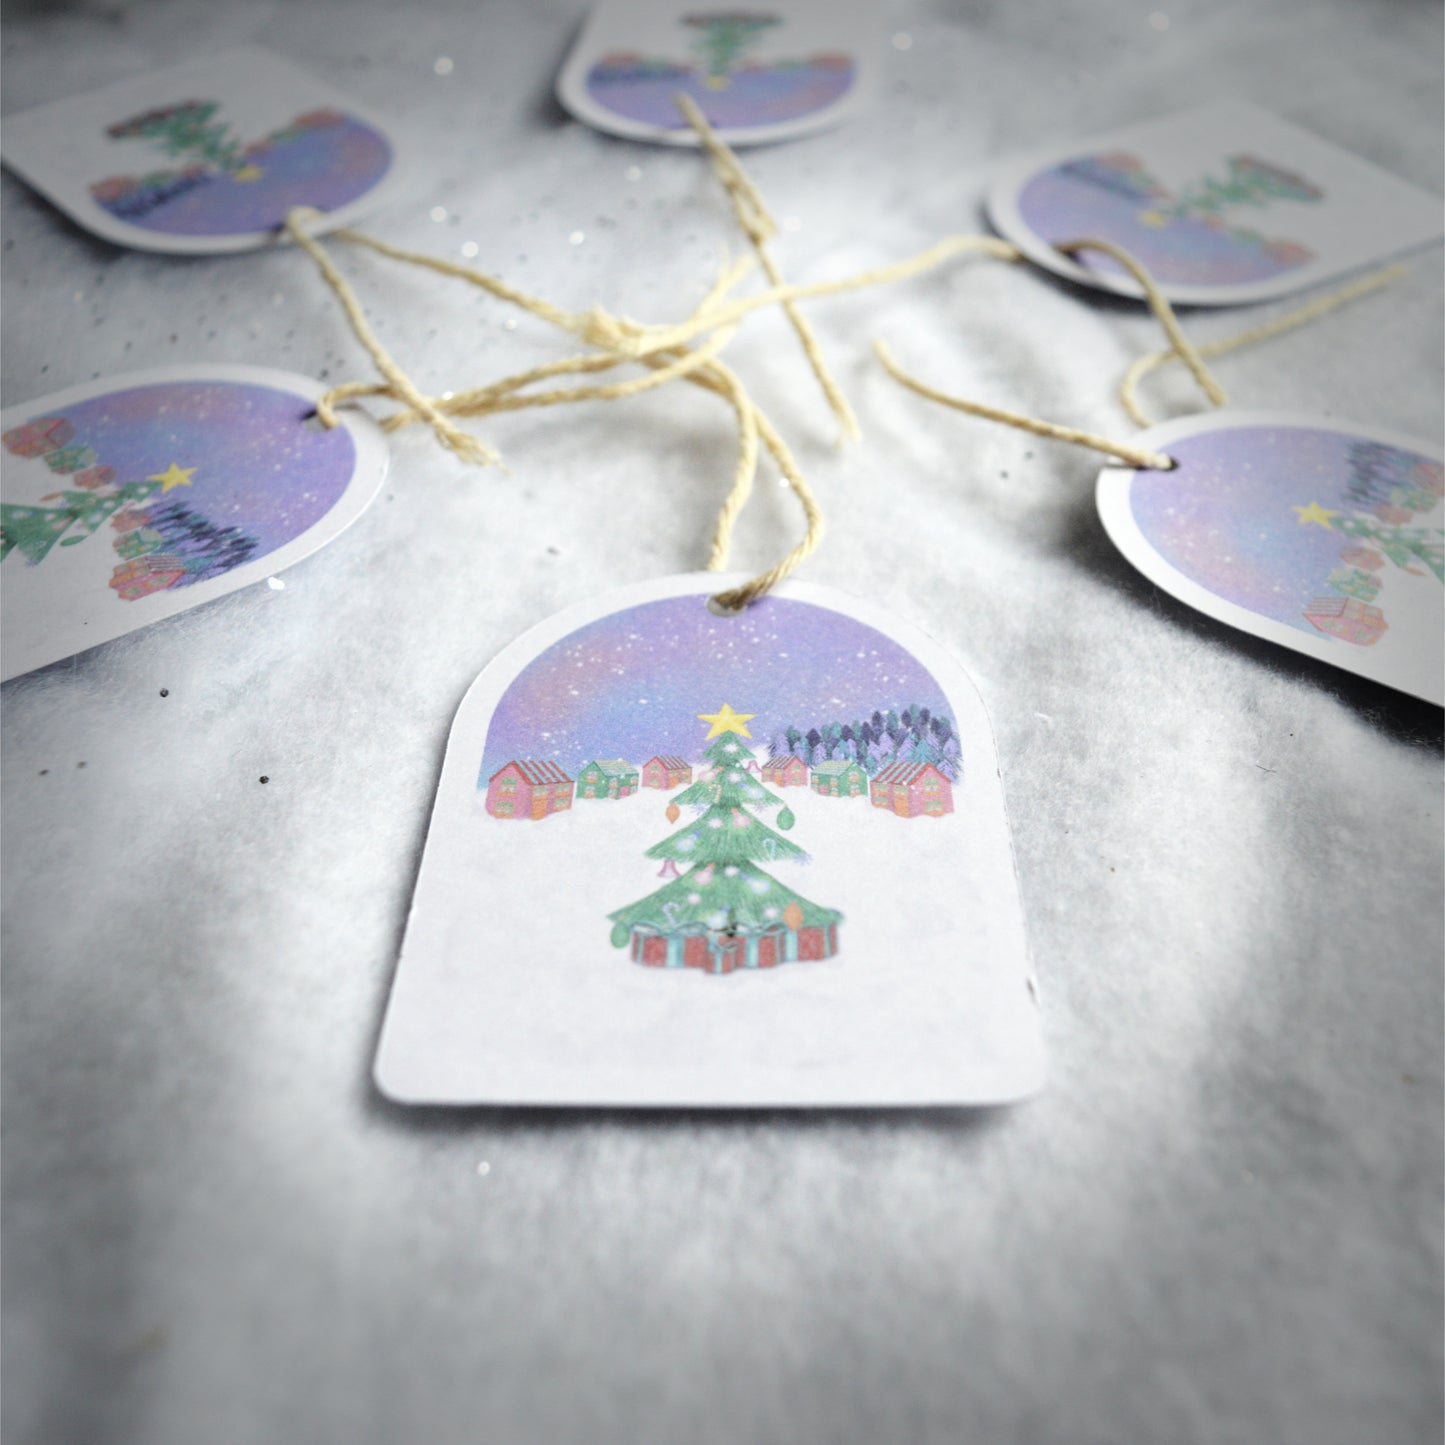 Christmas Collection - Winter Wonderland Gift Tags - Pack of 6 - Card tags with string